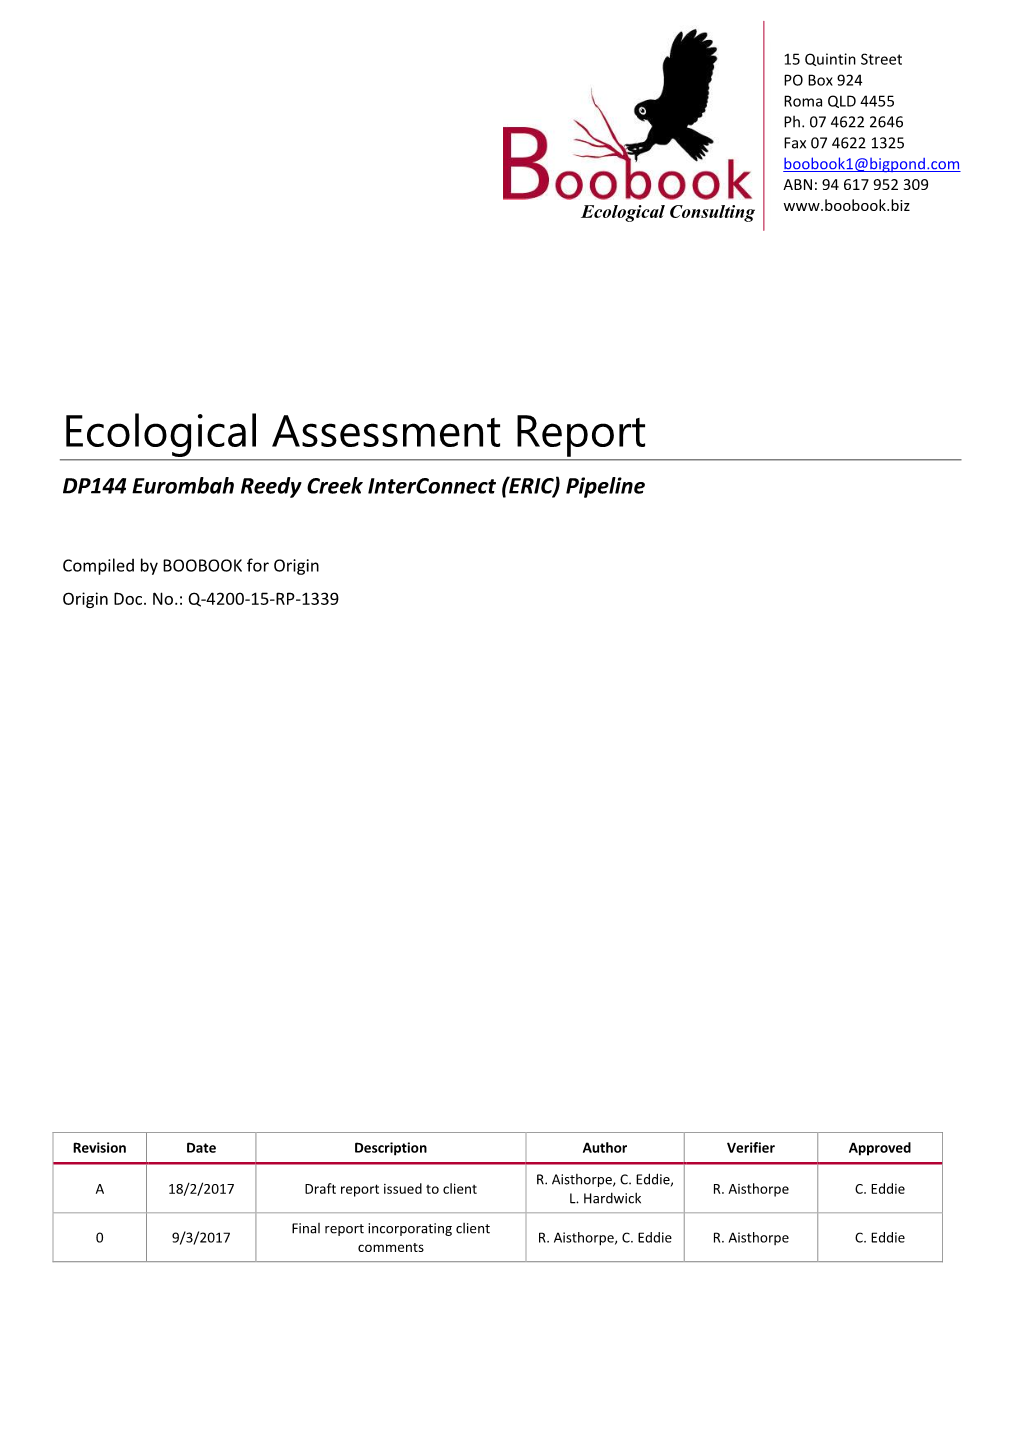 Ecological Assessment Report DP144 Eurombah Reedy Creek Interconnect (ERIC) Pipeline